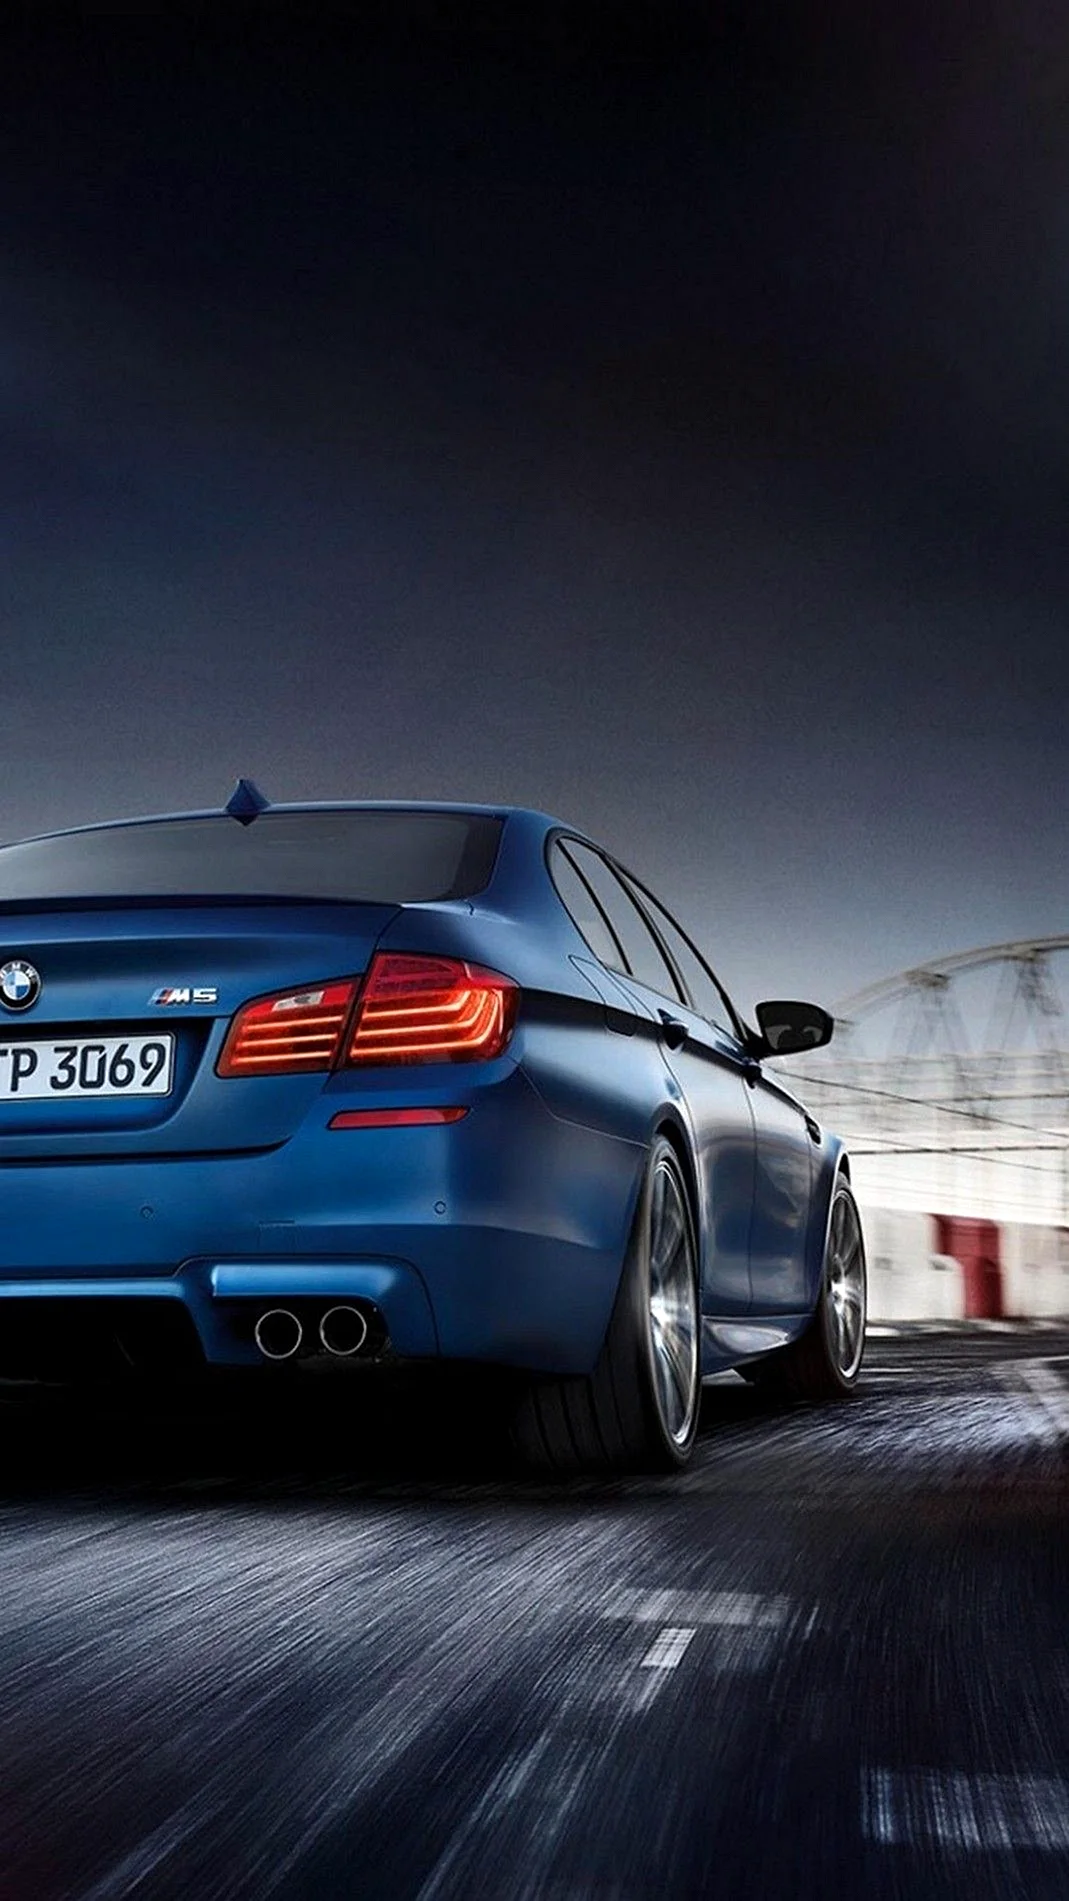 Bmw F10 M5 Wallpaper For iPhone